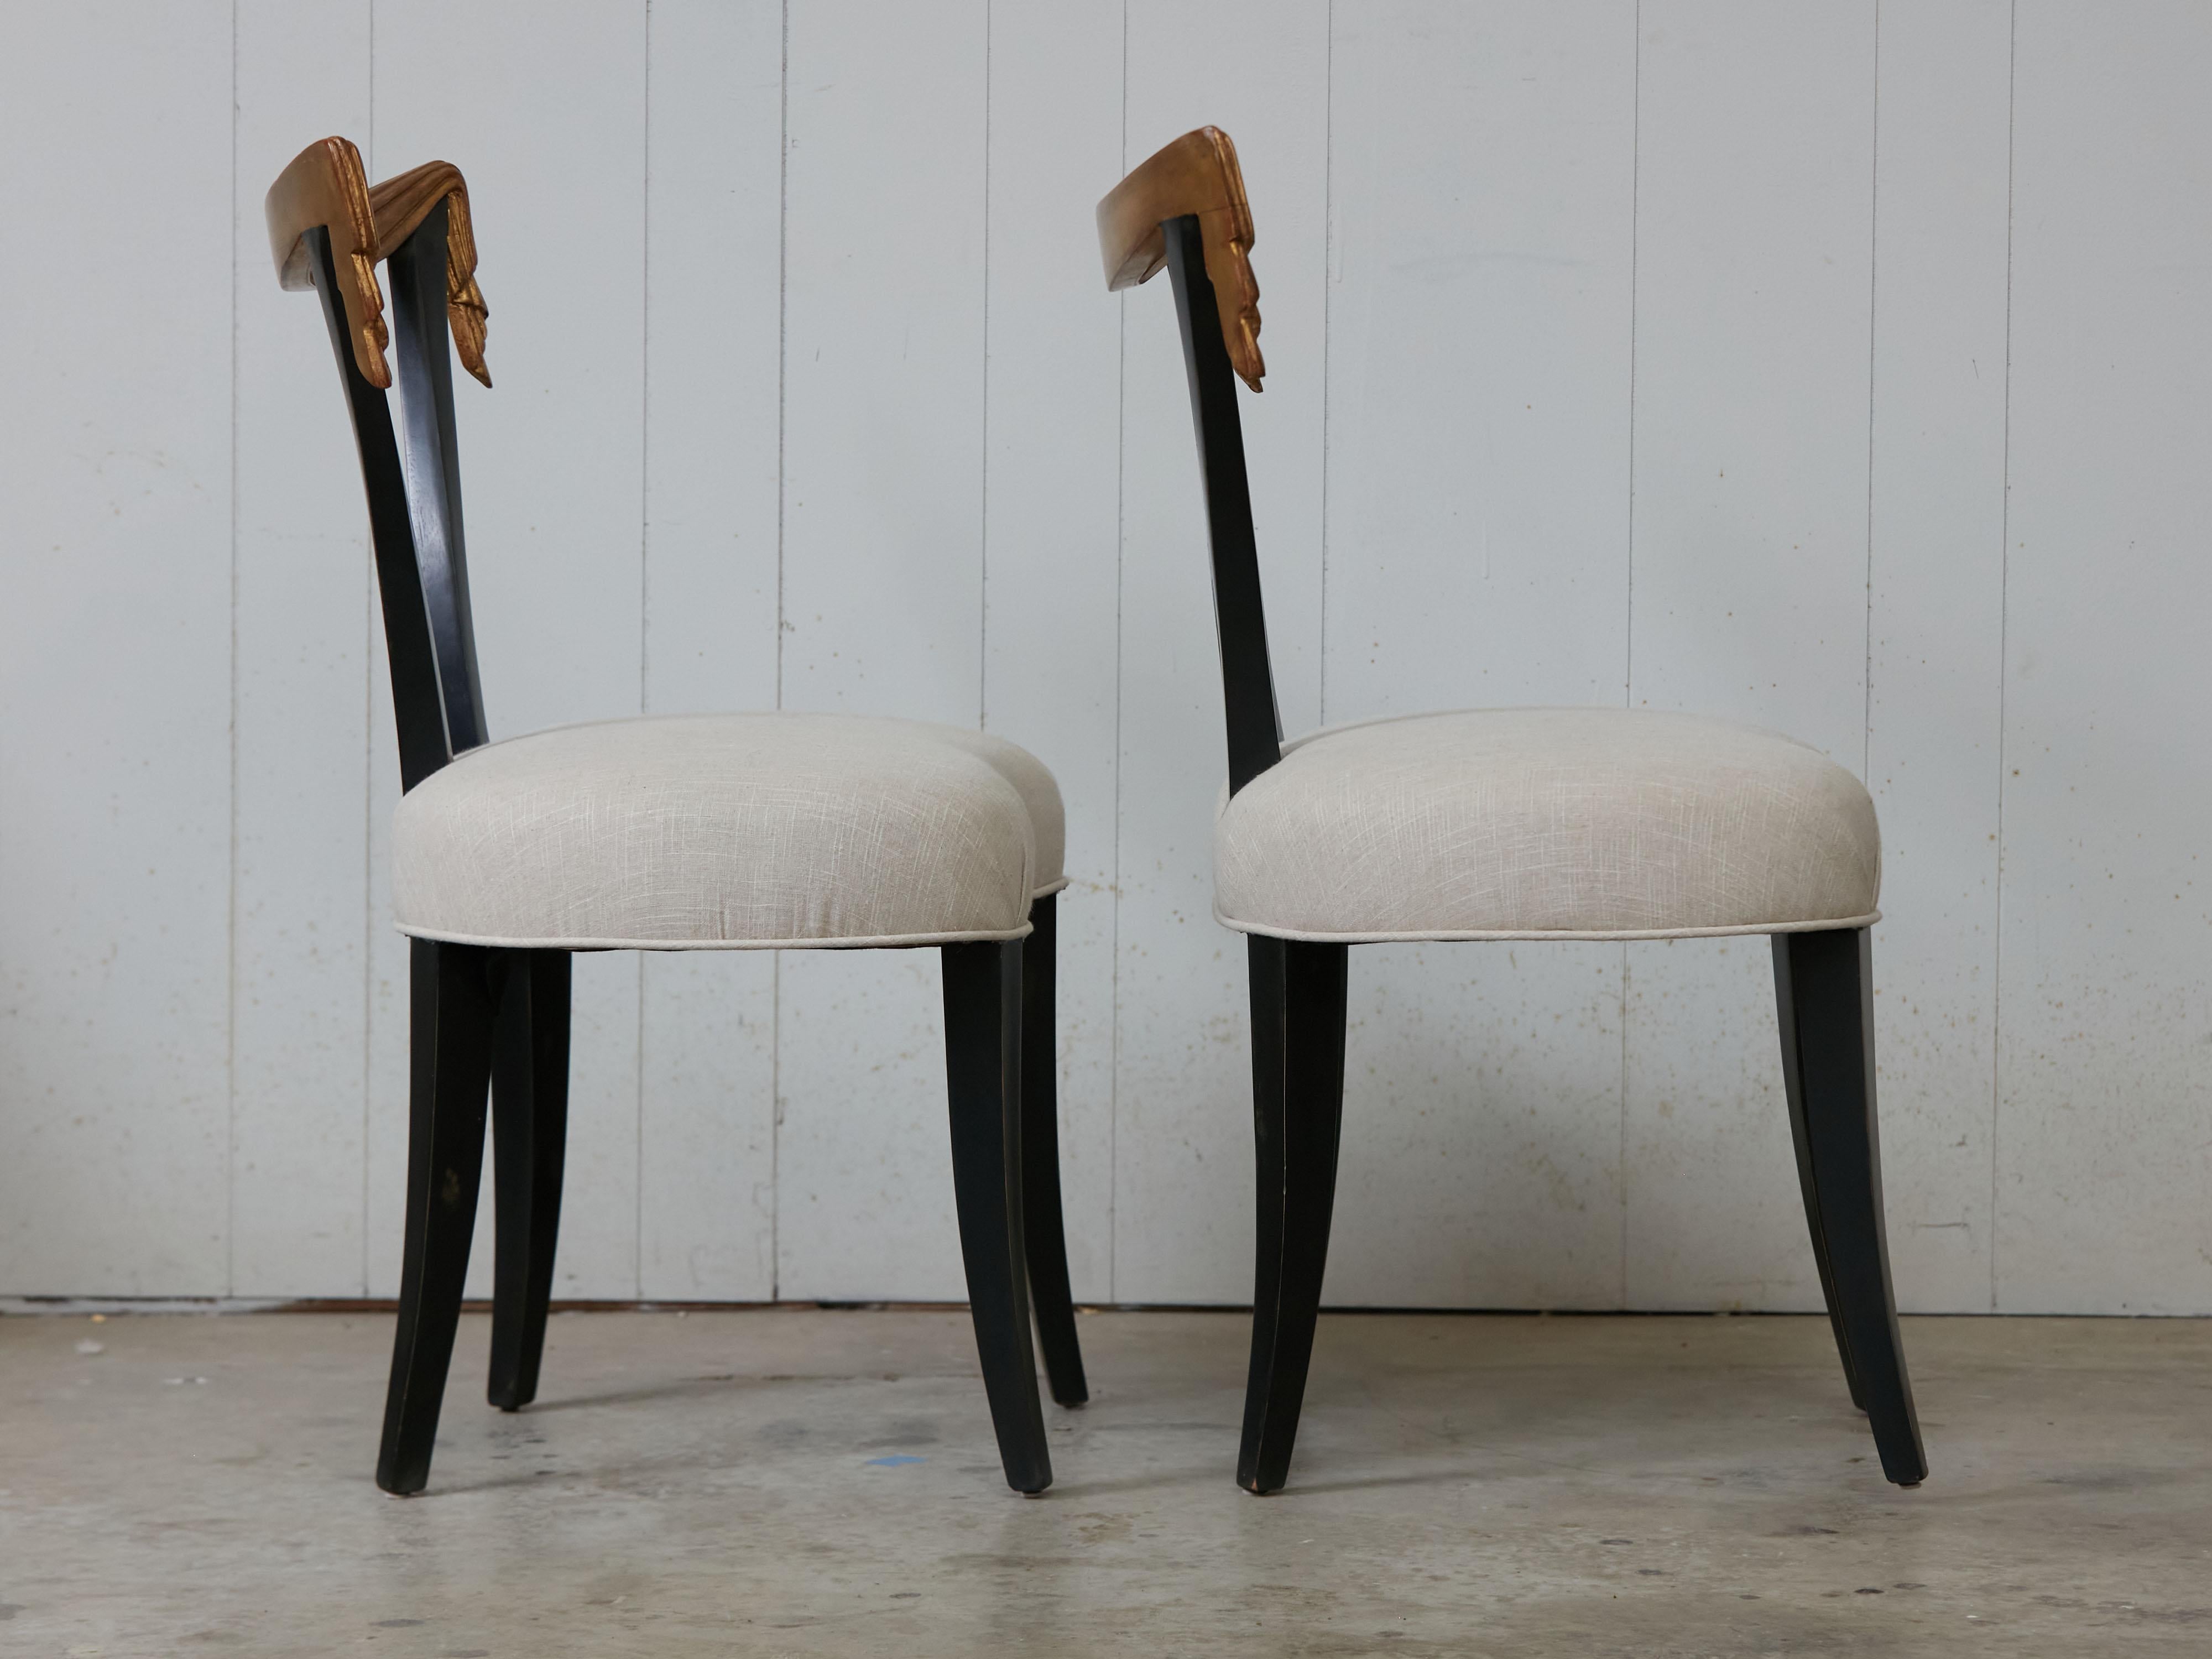 Pair of Midcentury Dorothy Draper Style Hollywood Regency Black and Gold Chairs For Sale 8